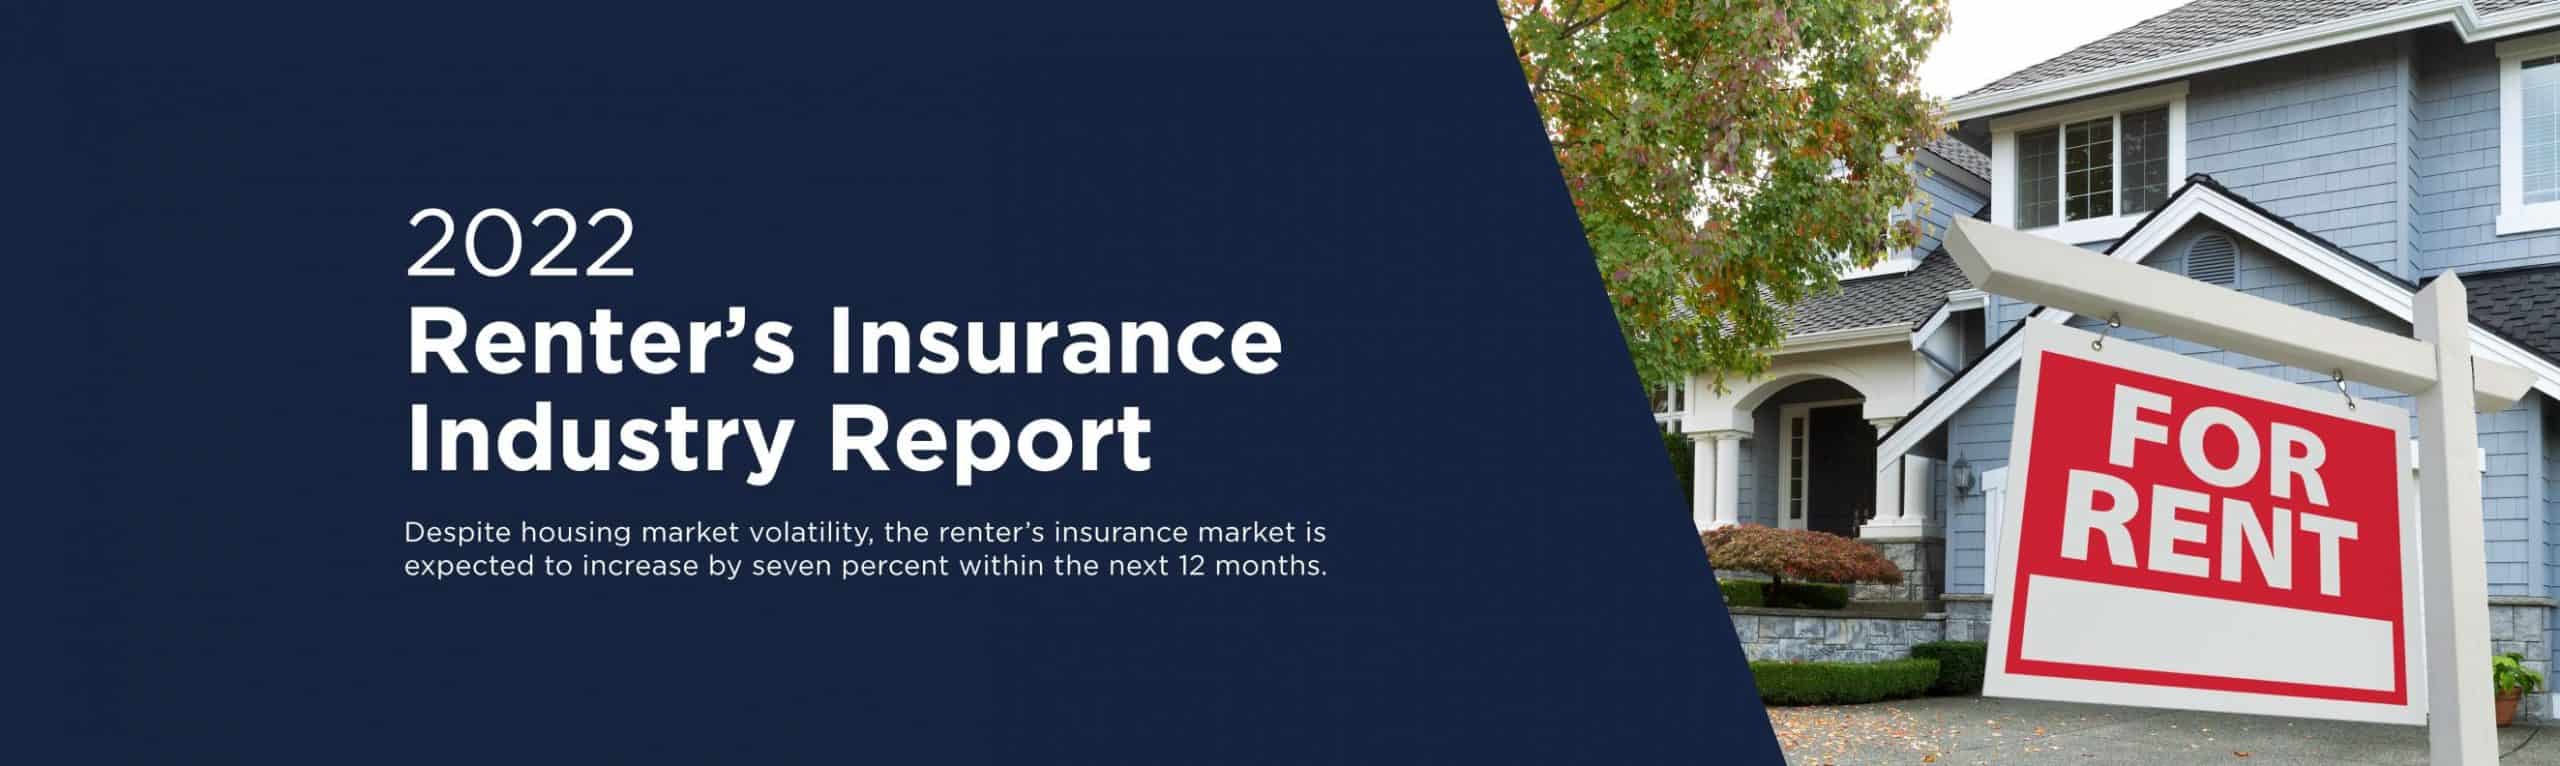 2022 Renter’s Insurance Industry Report Featured Image